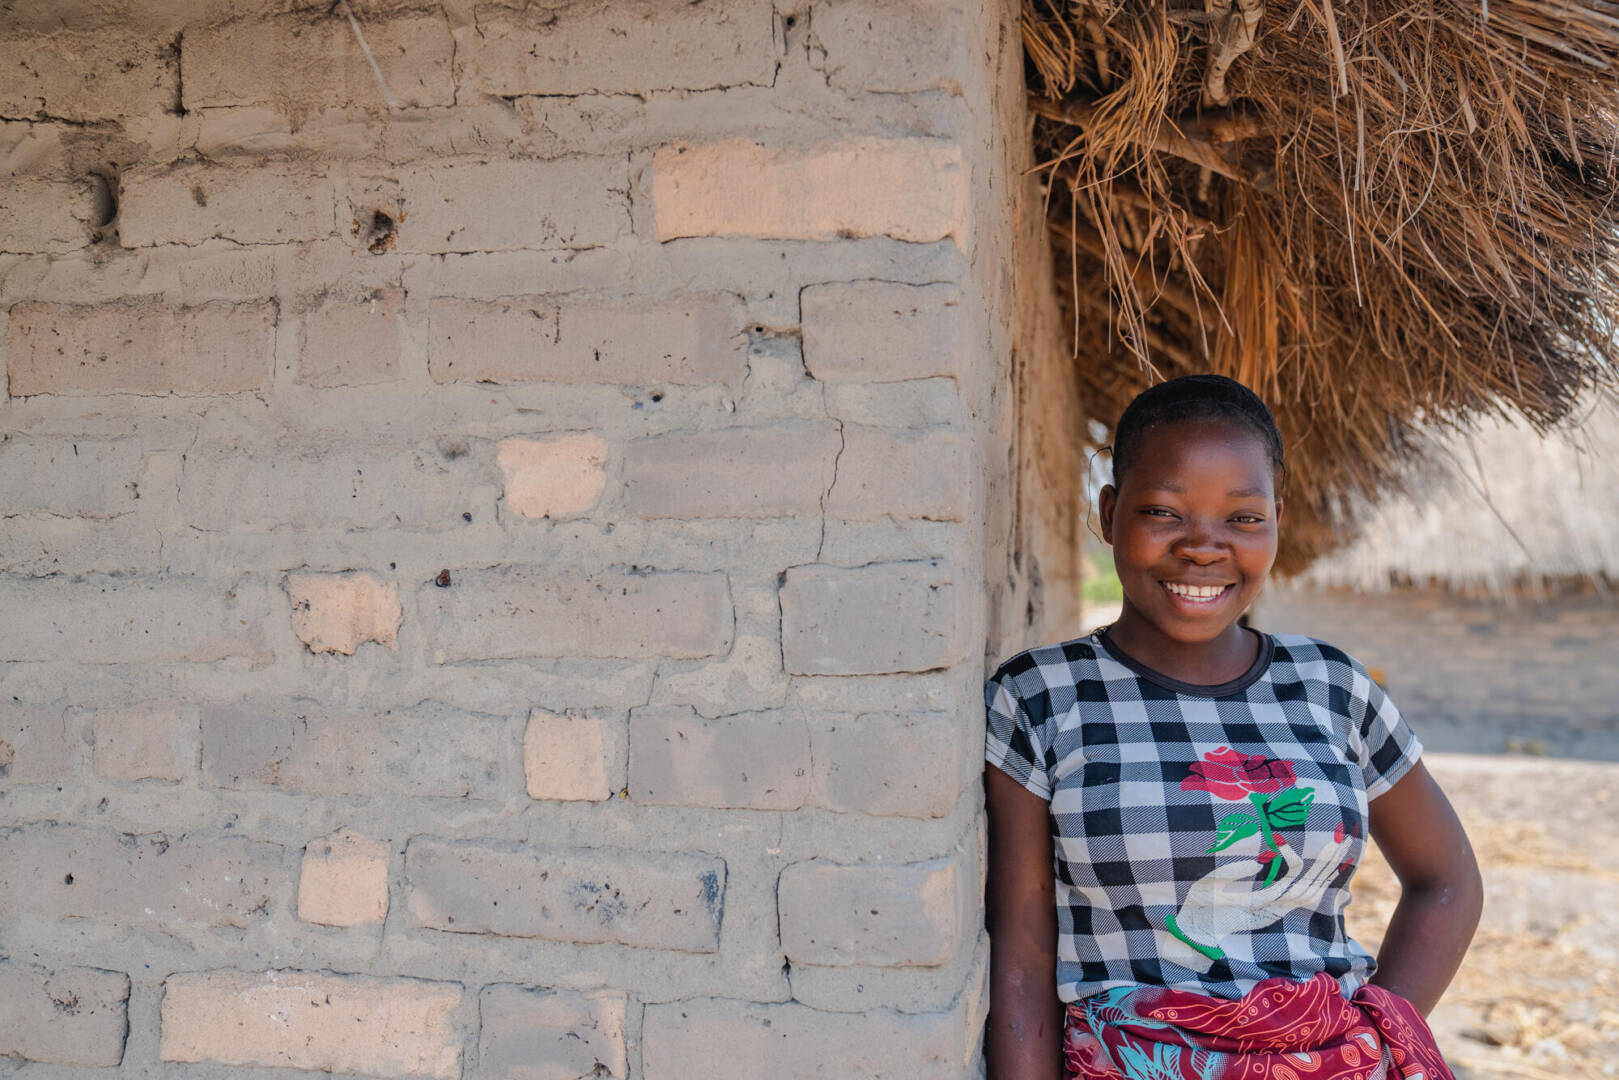 A smile fills a young girl's face as she stands next to a house made of mud and bricks.